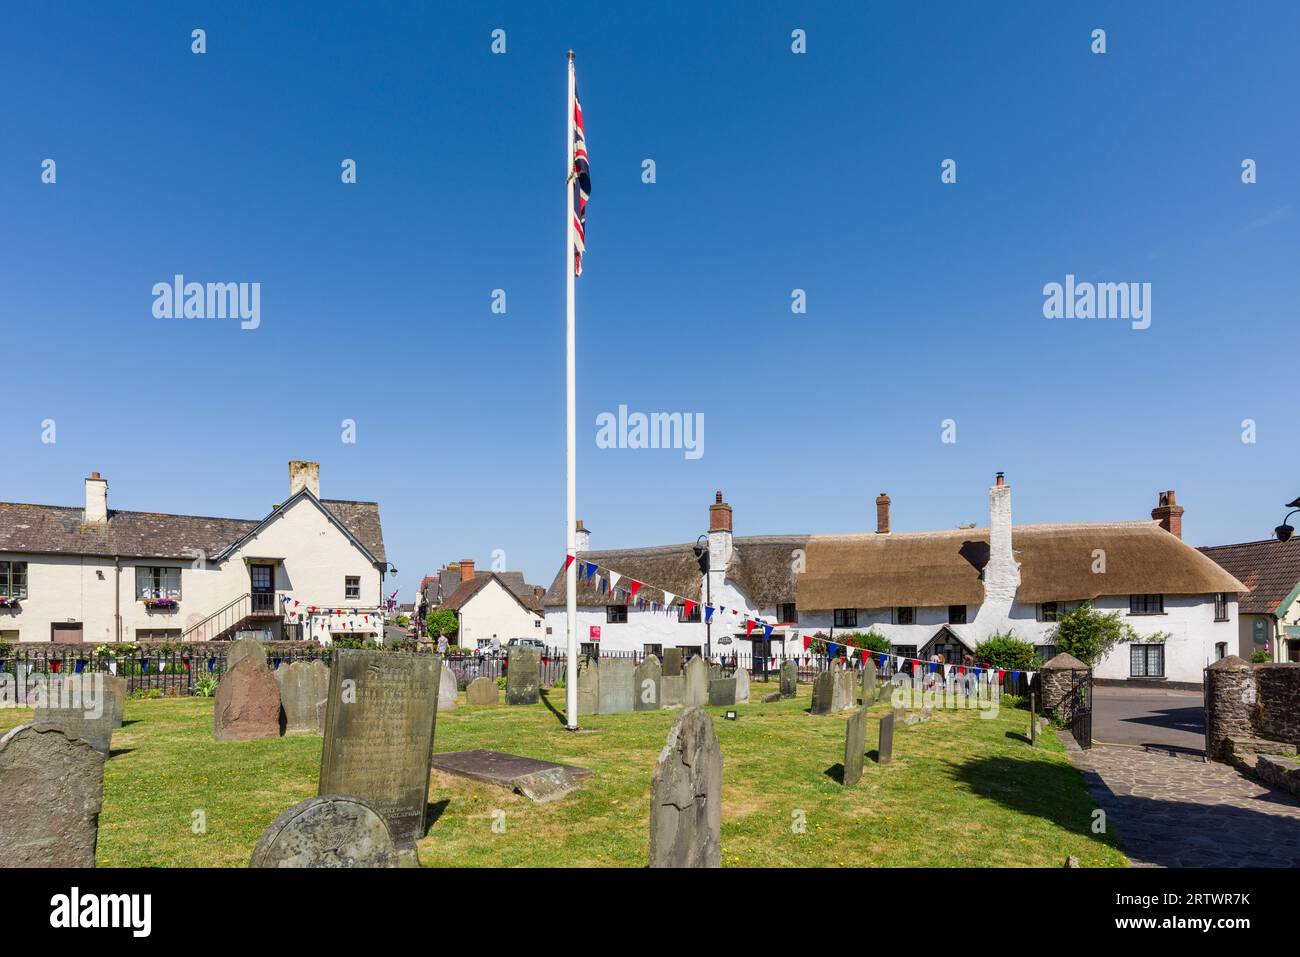 The churchyard of the Church of St Dubricius overlooking the hight Street in the village of Porlock, Exmoor National Park, Somerset, England. Stock Photo